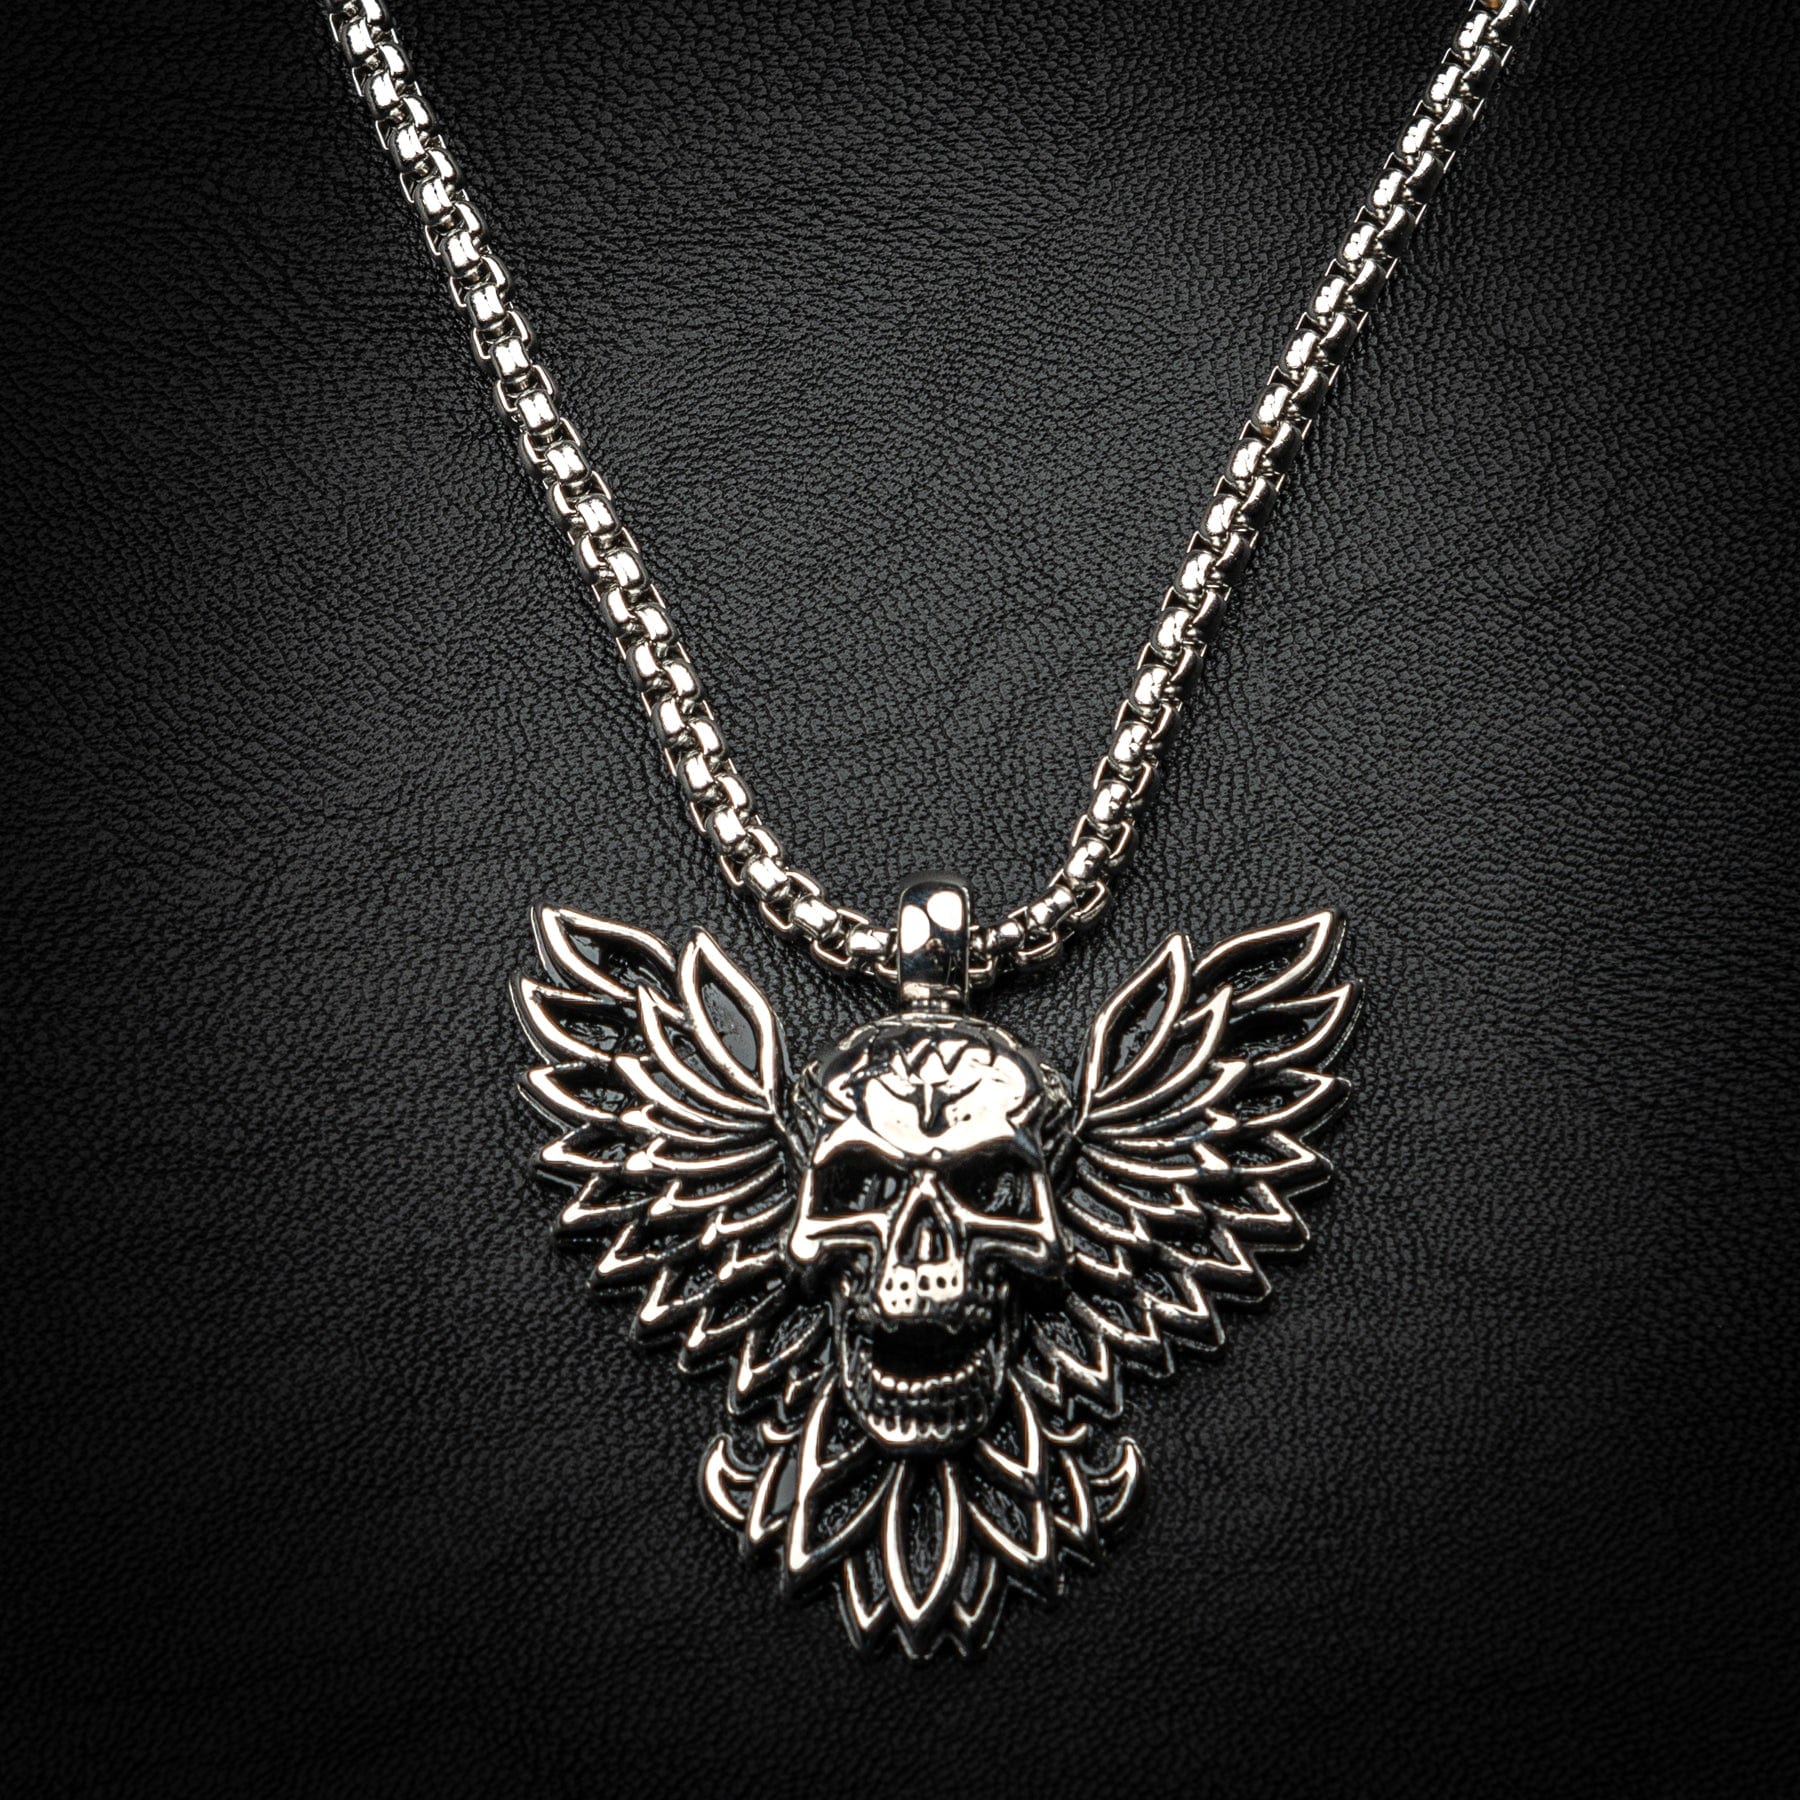 Wornstar Clothing Necklace Vengeance Chain Necklace